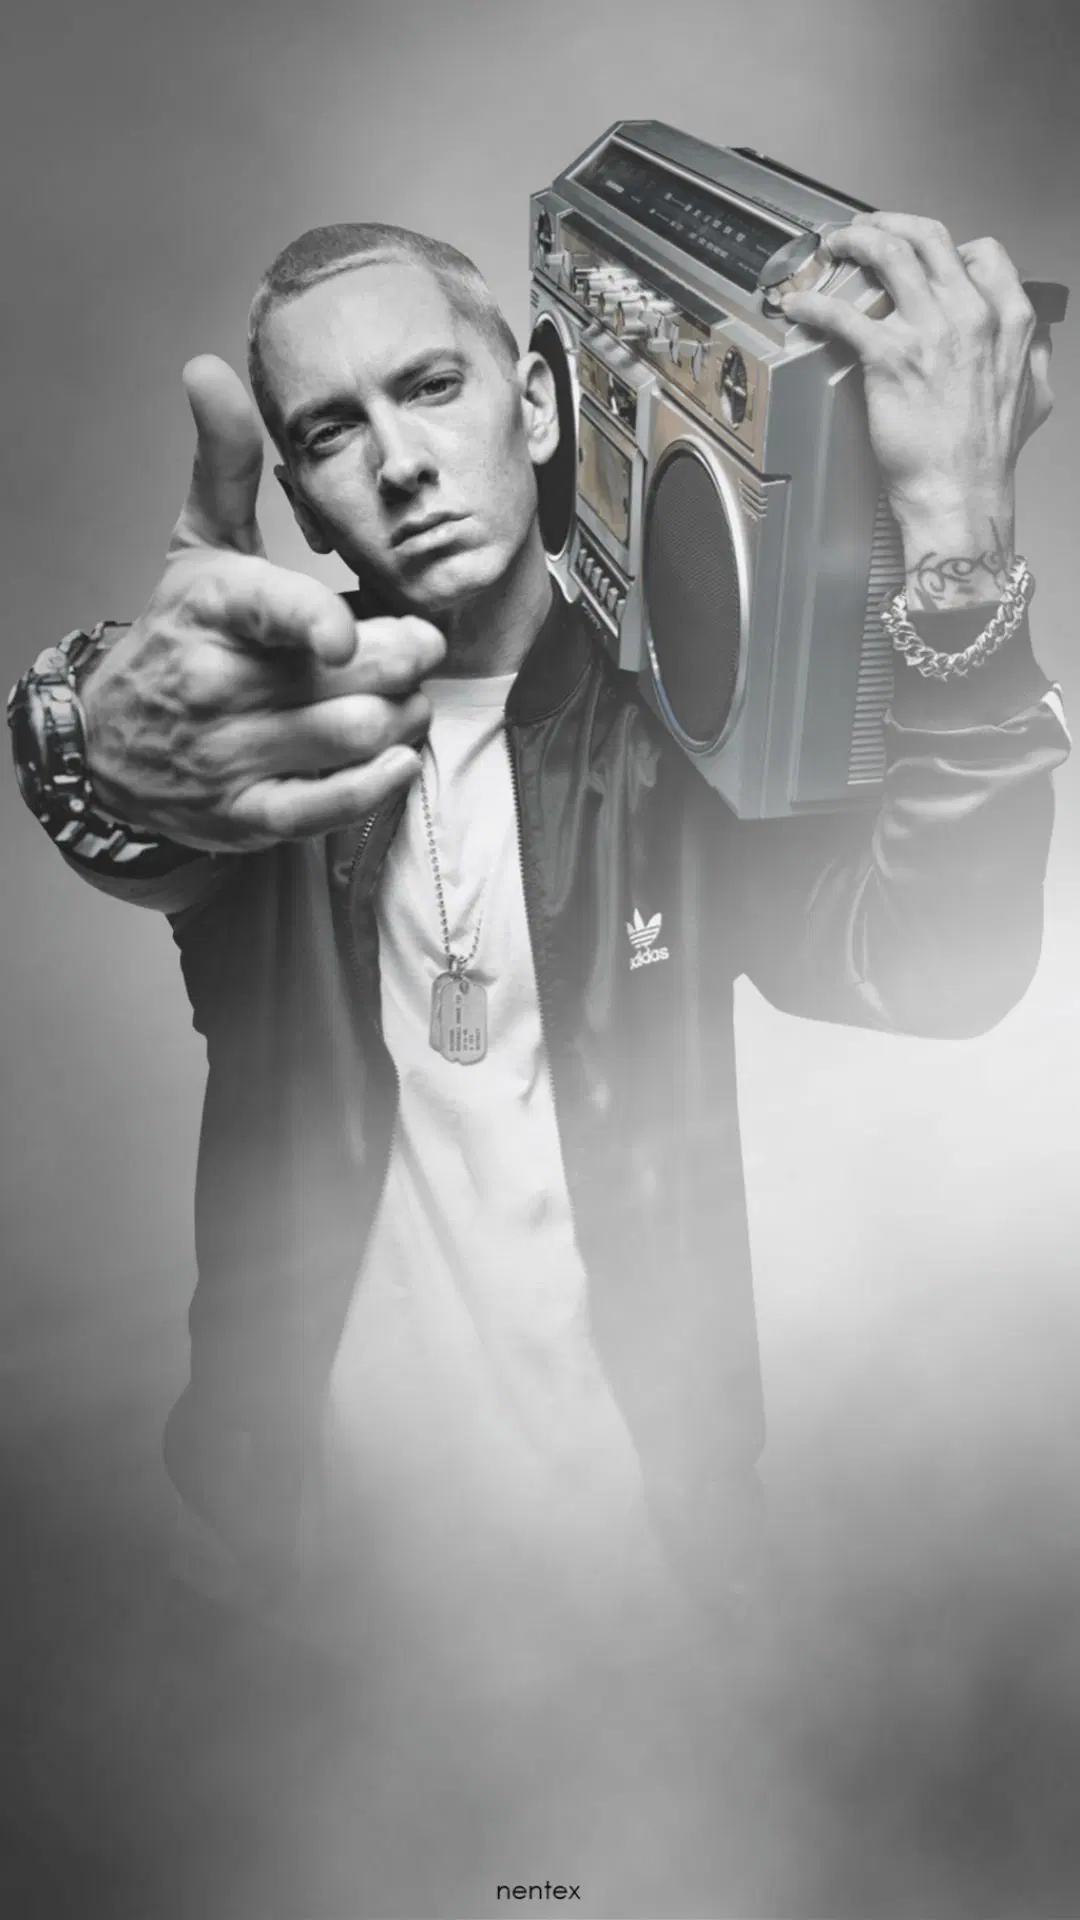 Eminem: Became passionate about rapping at a young age of fourteen. 1080x1920 Full HD Background.